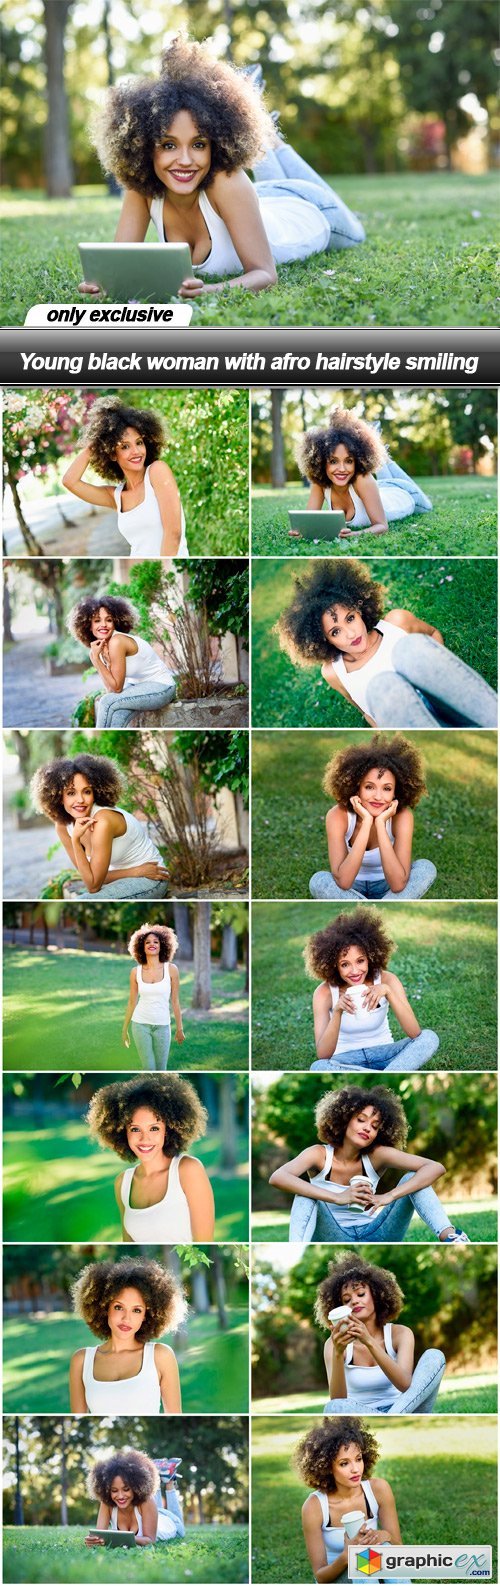 Young black woman with afro hairstyle smiling - 14 UHQ JPEG